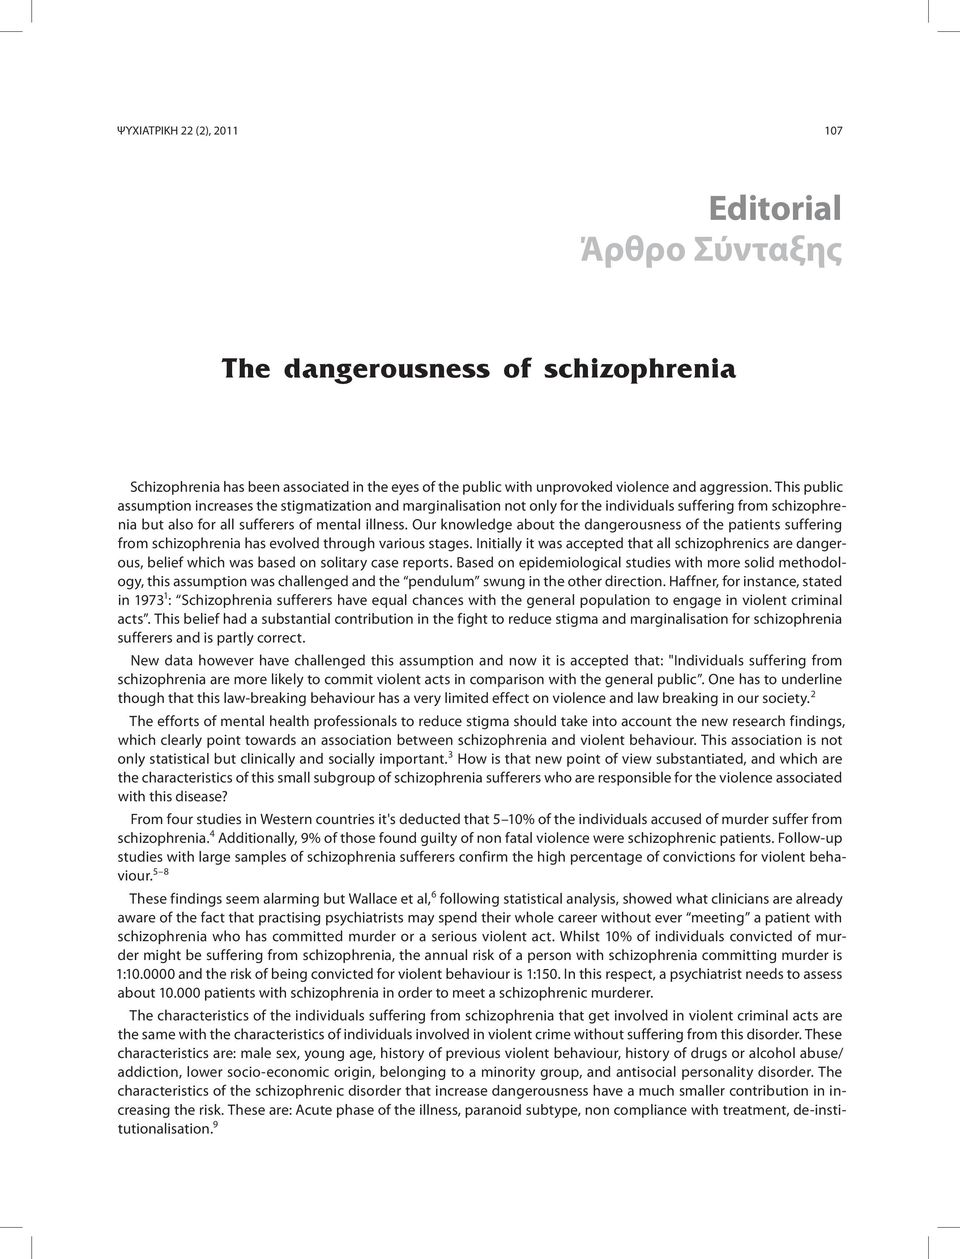 Our knowledge about the dangerousness of the patients suffering from schizophrenia has evolved through various stages.